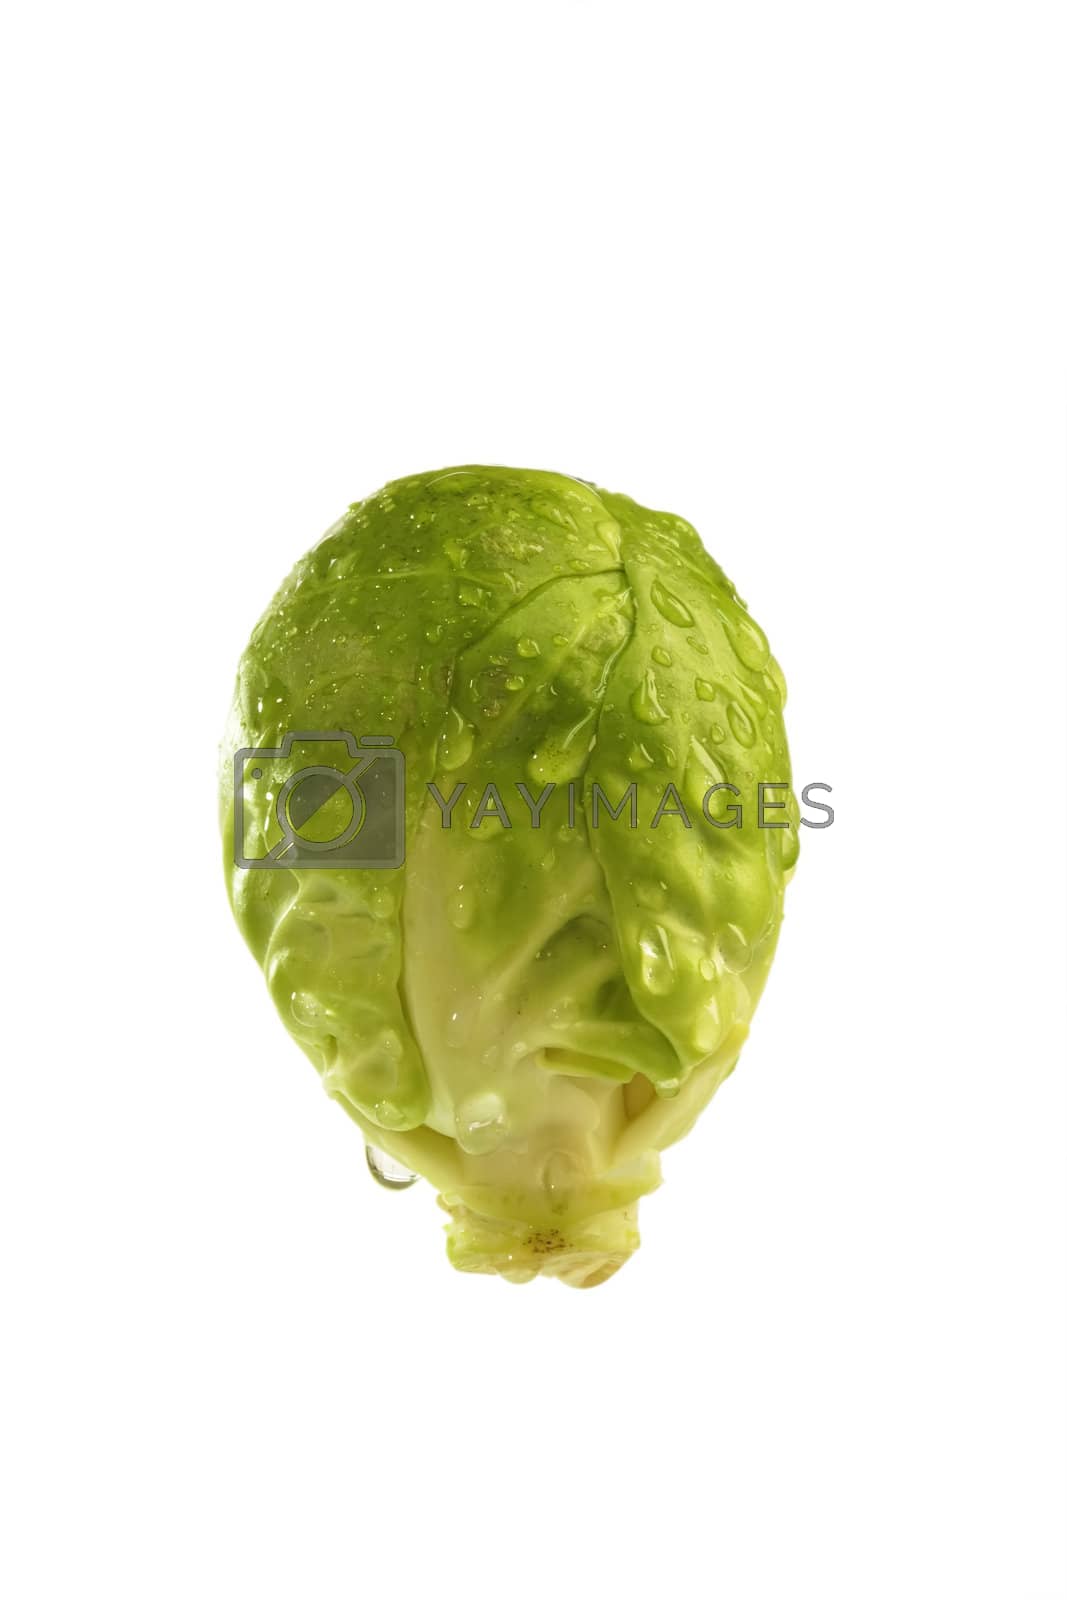 Royalty free image of Brussel Sprout by Teamarbeit